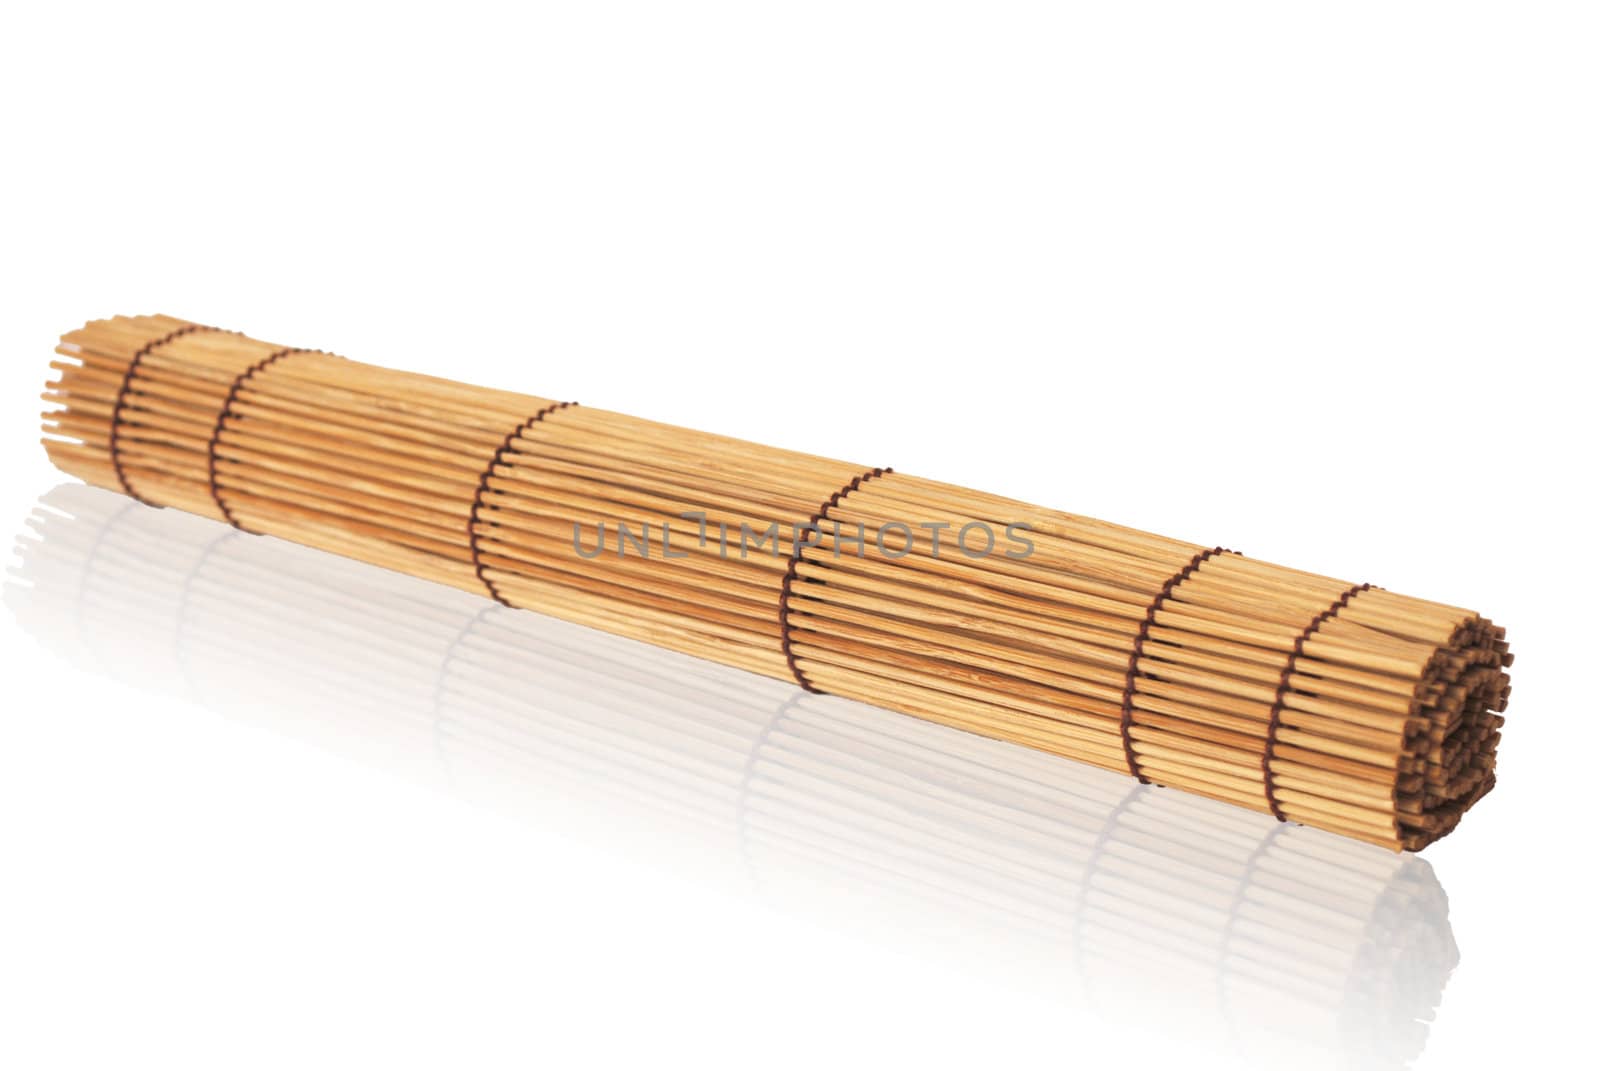 rolled bamboo mat on a white background                 by svtrotof